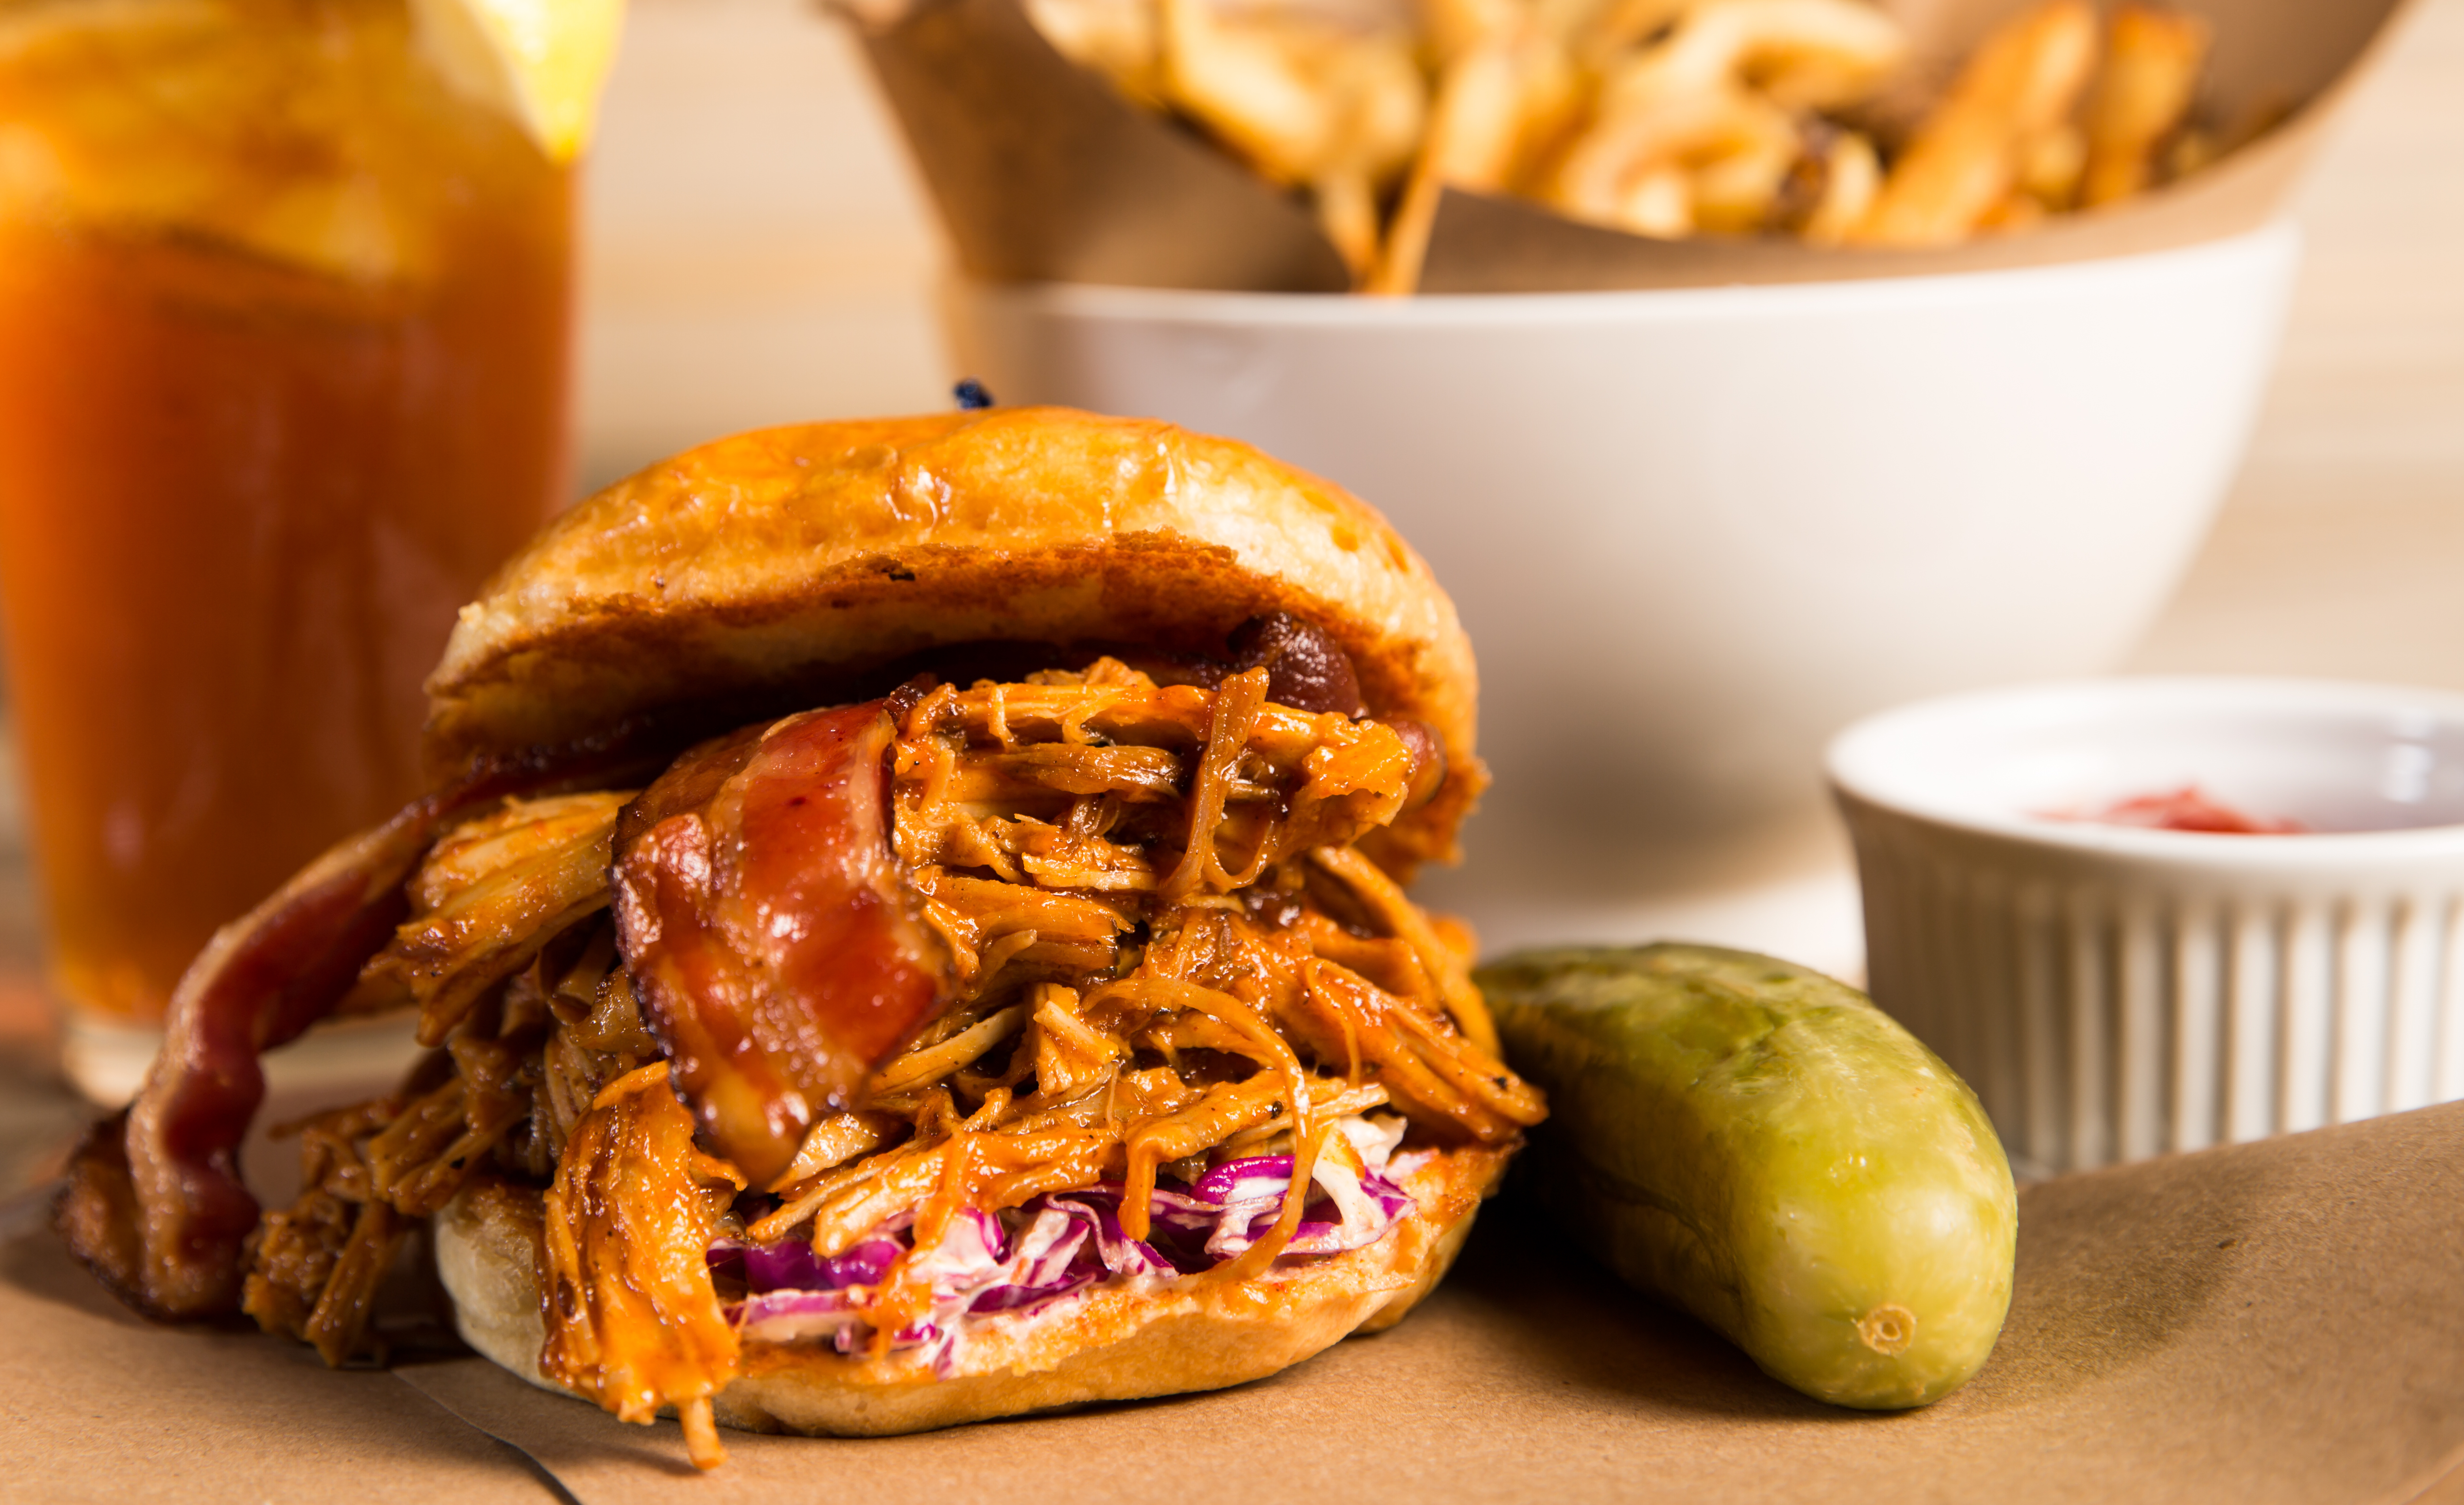 A close-up image of a BBQ sandwich at Atlanta’s Muss &amp; Turner’s restaurant.